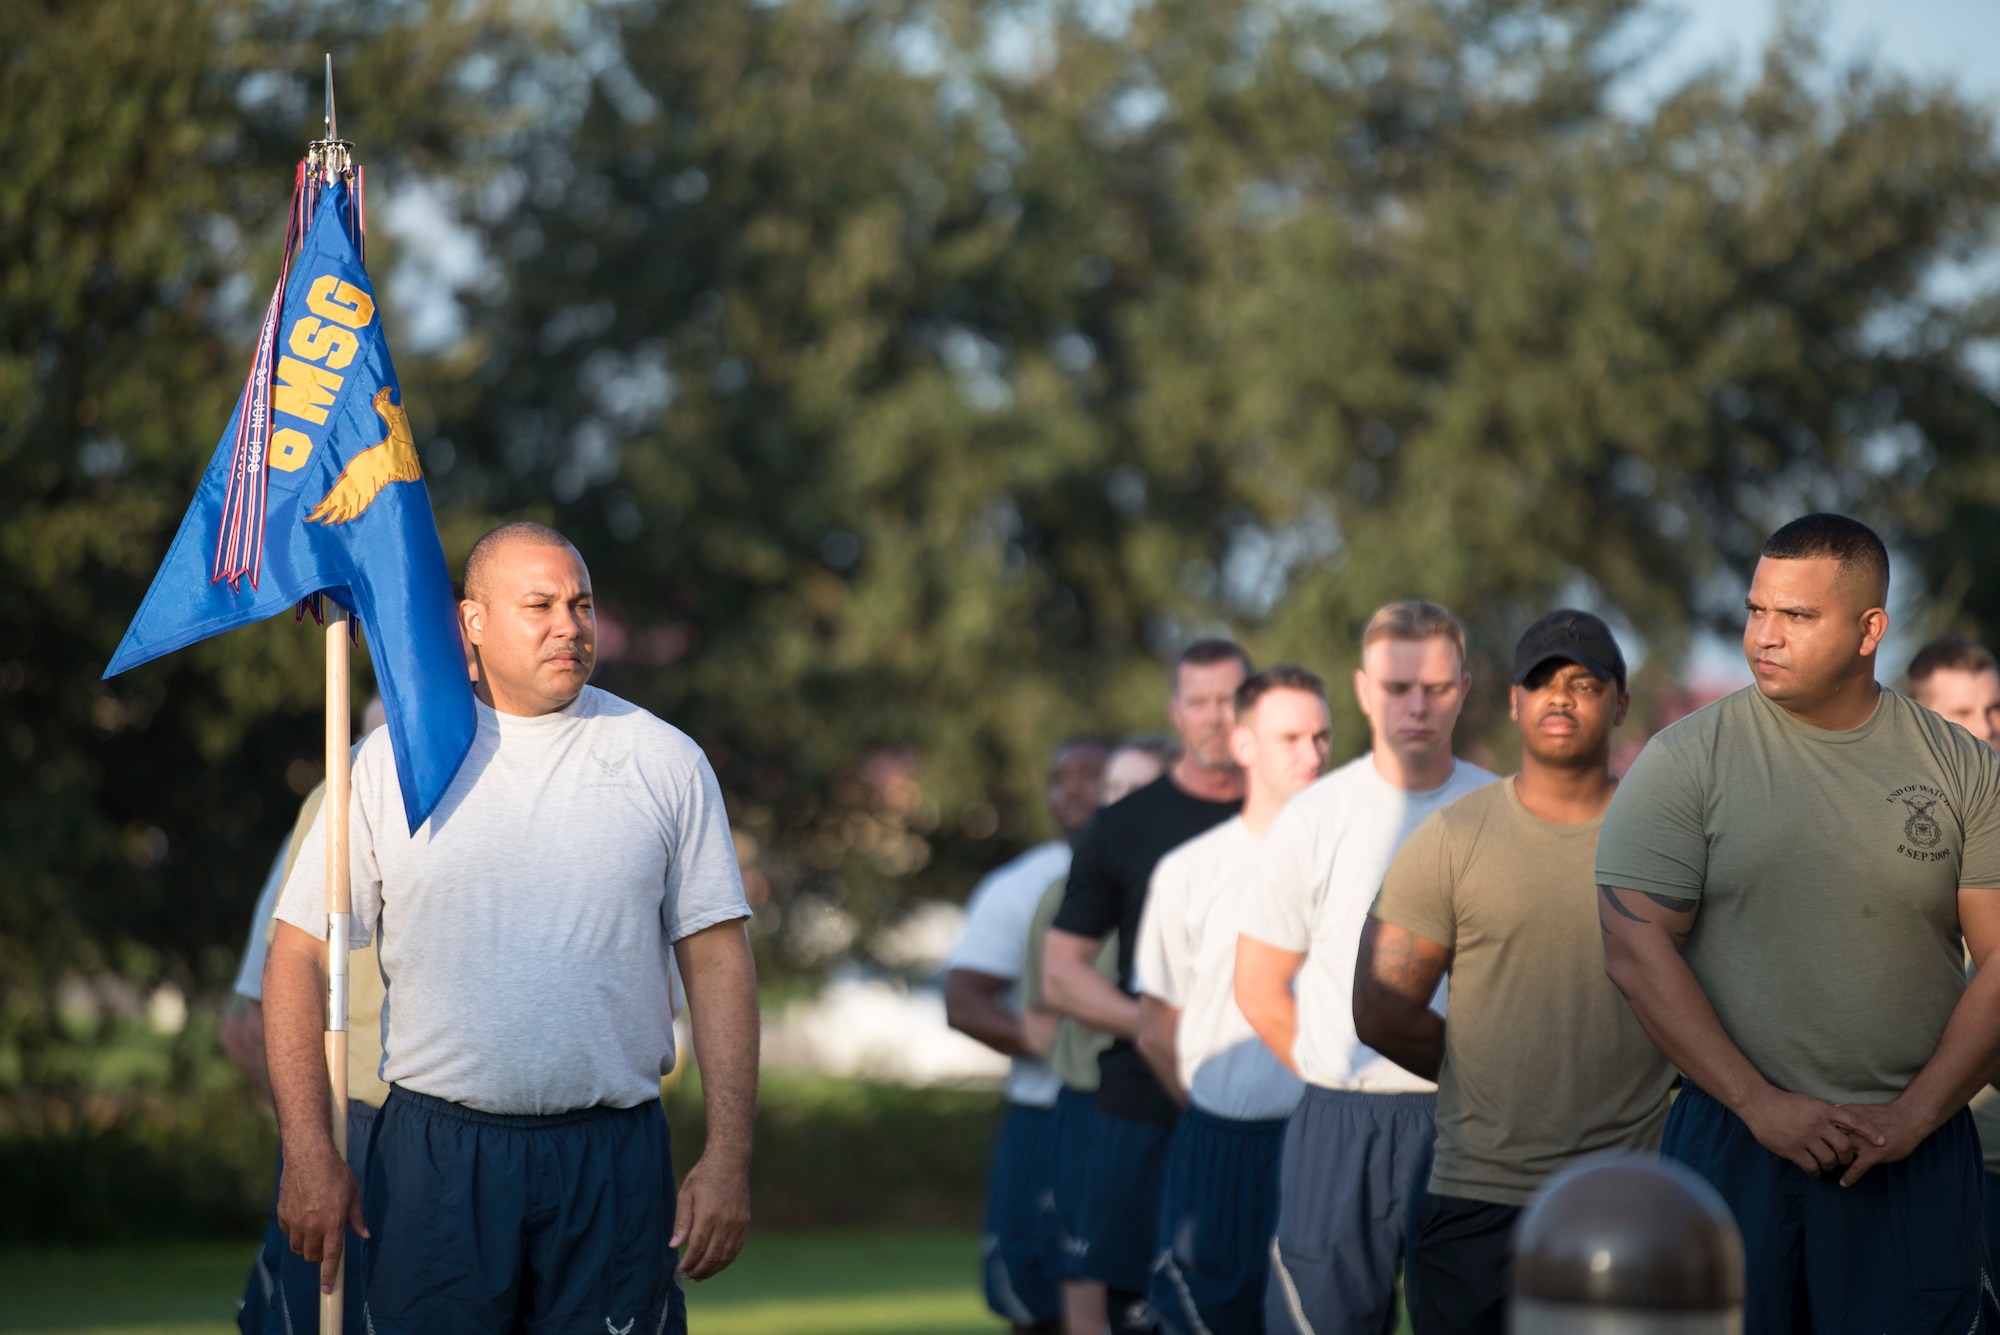 U.S. Airmen with the 6th Security Forces Squadron stand in formation before the 11th annual 1st Lt. Joseph D. Helton Haul 5K at MacDill Air Force Base, Fla., Sept. 18, 2020.